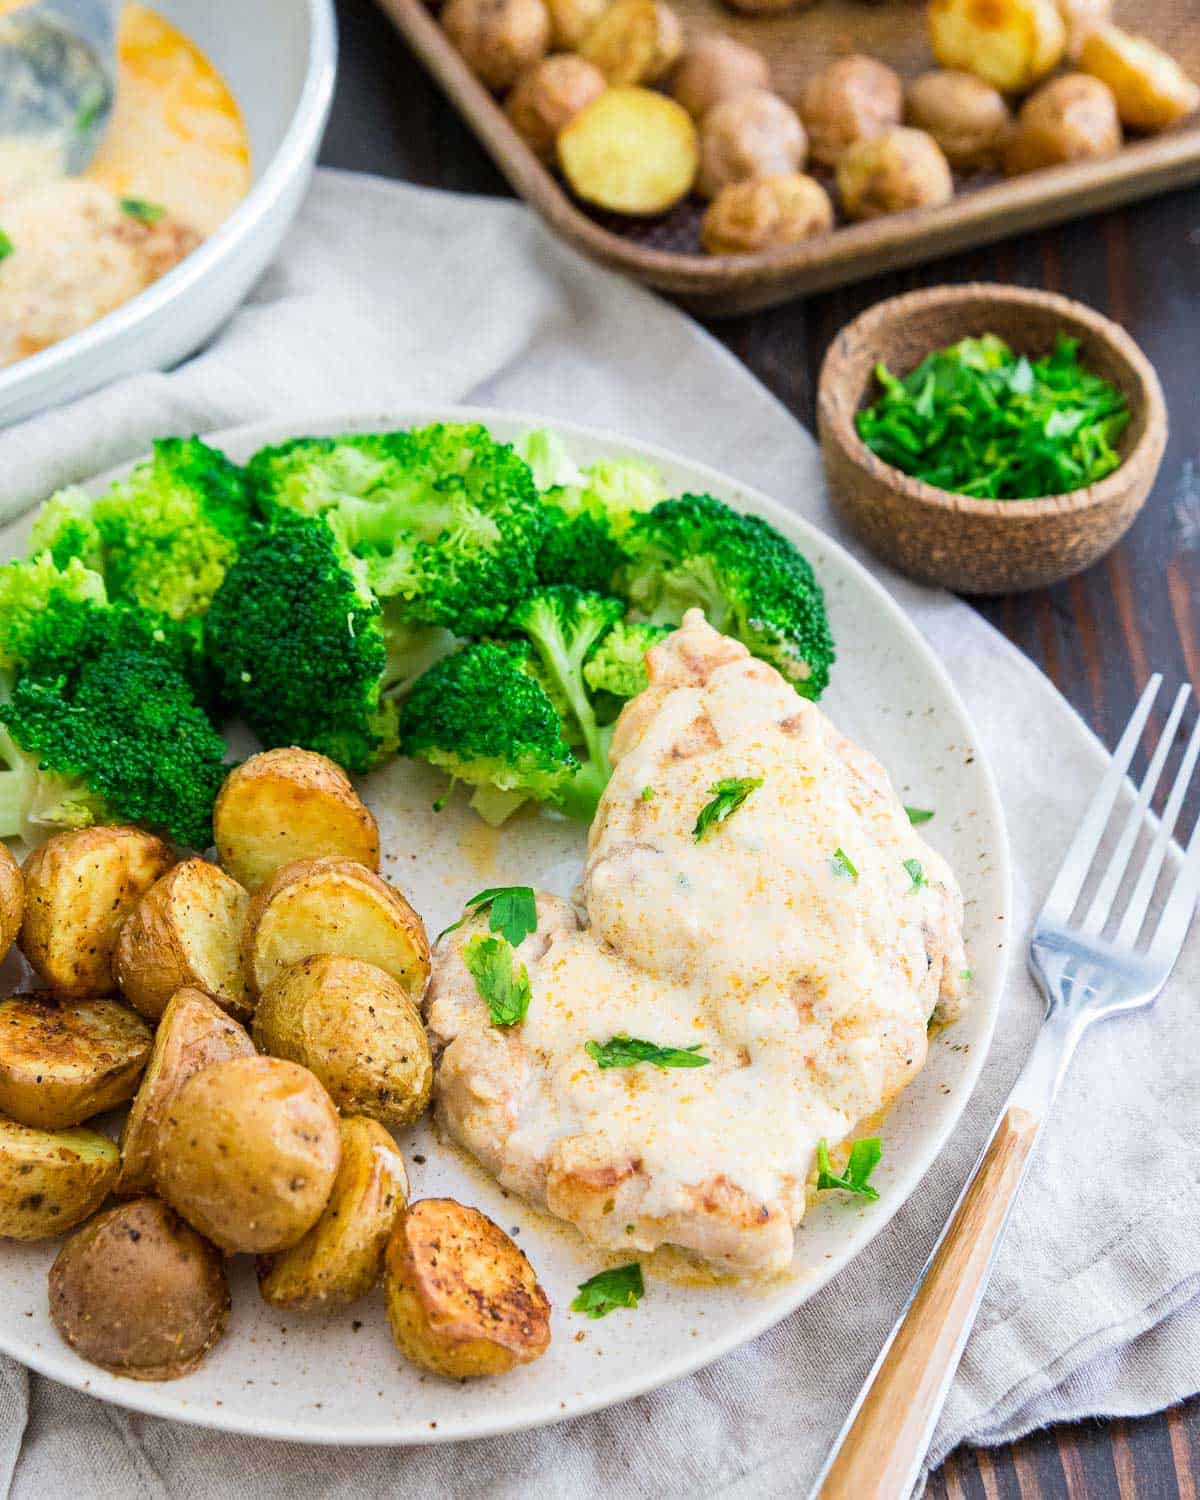 This chicken cream cheese recipe is an easy dinner served with roasted potatoes and steamed broccoli.